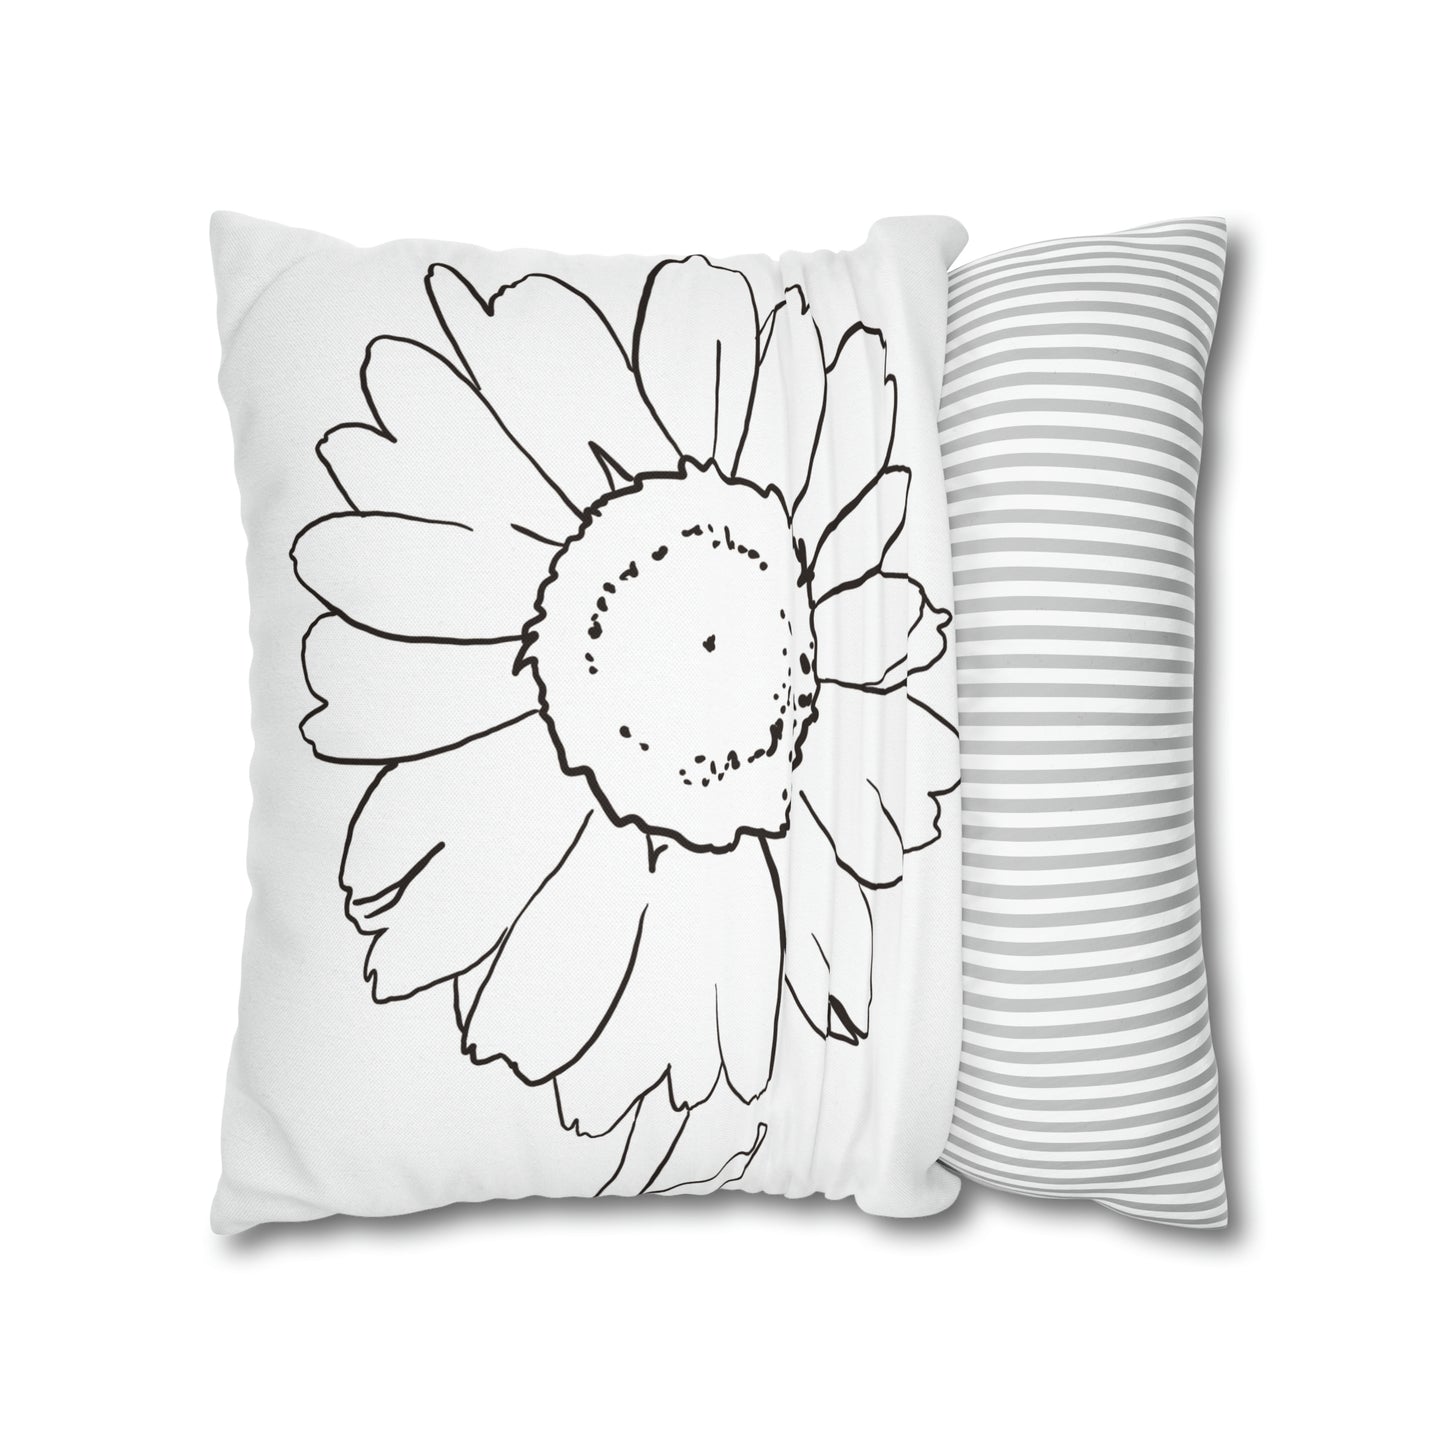 April Birth Flower Double-Sided Pillow Cover